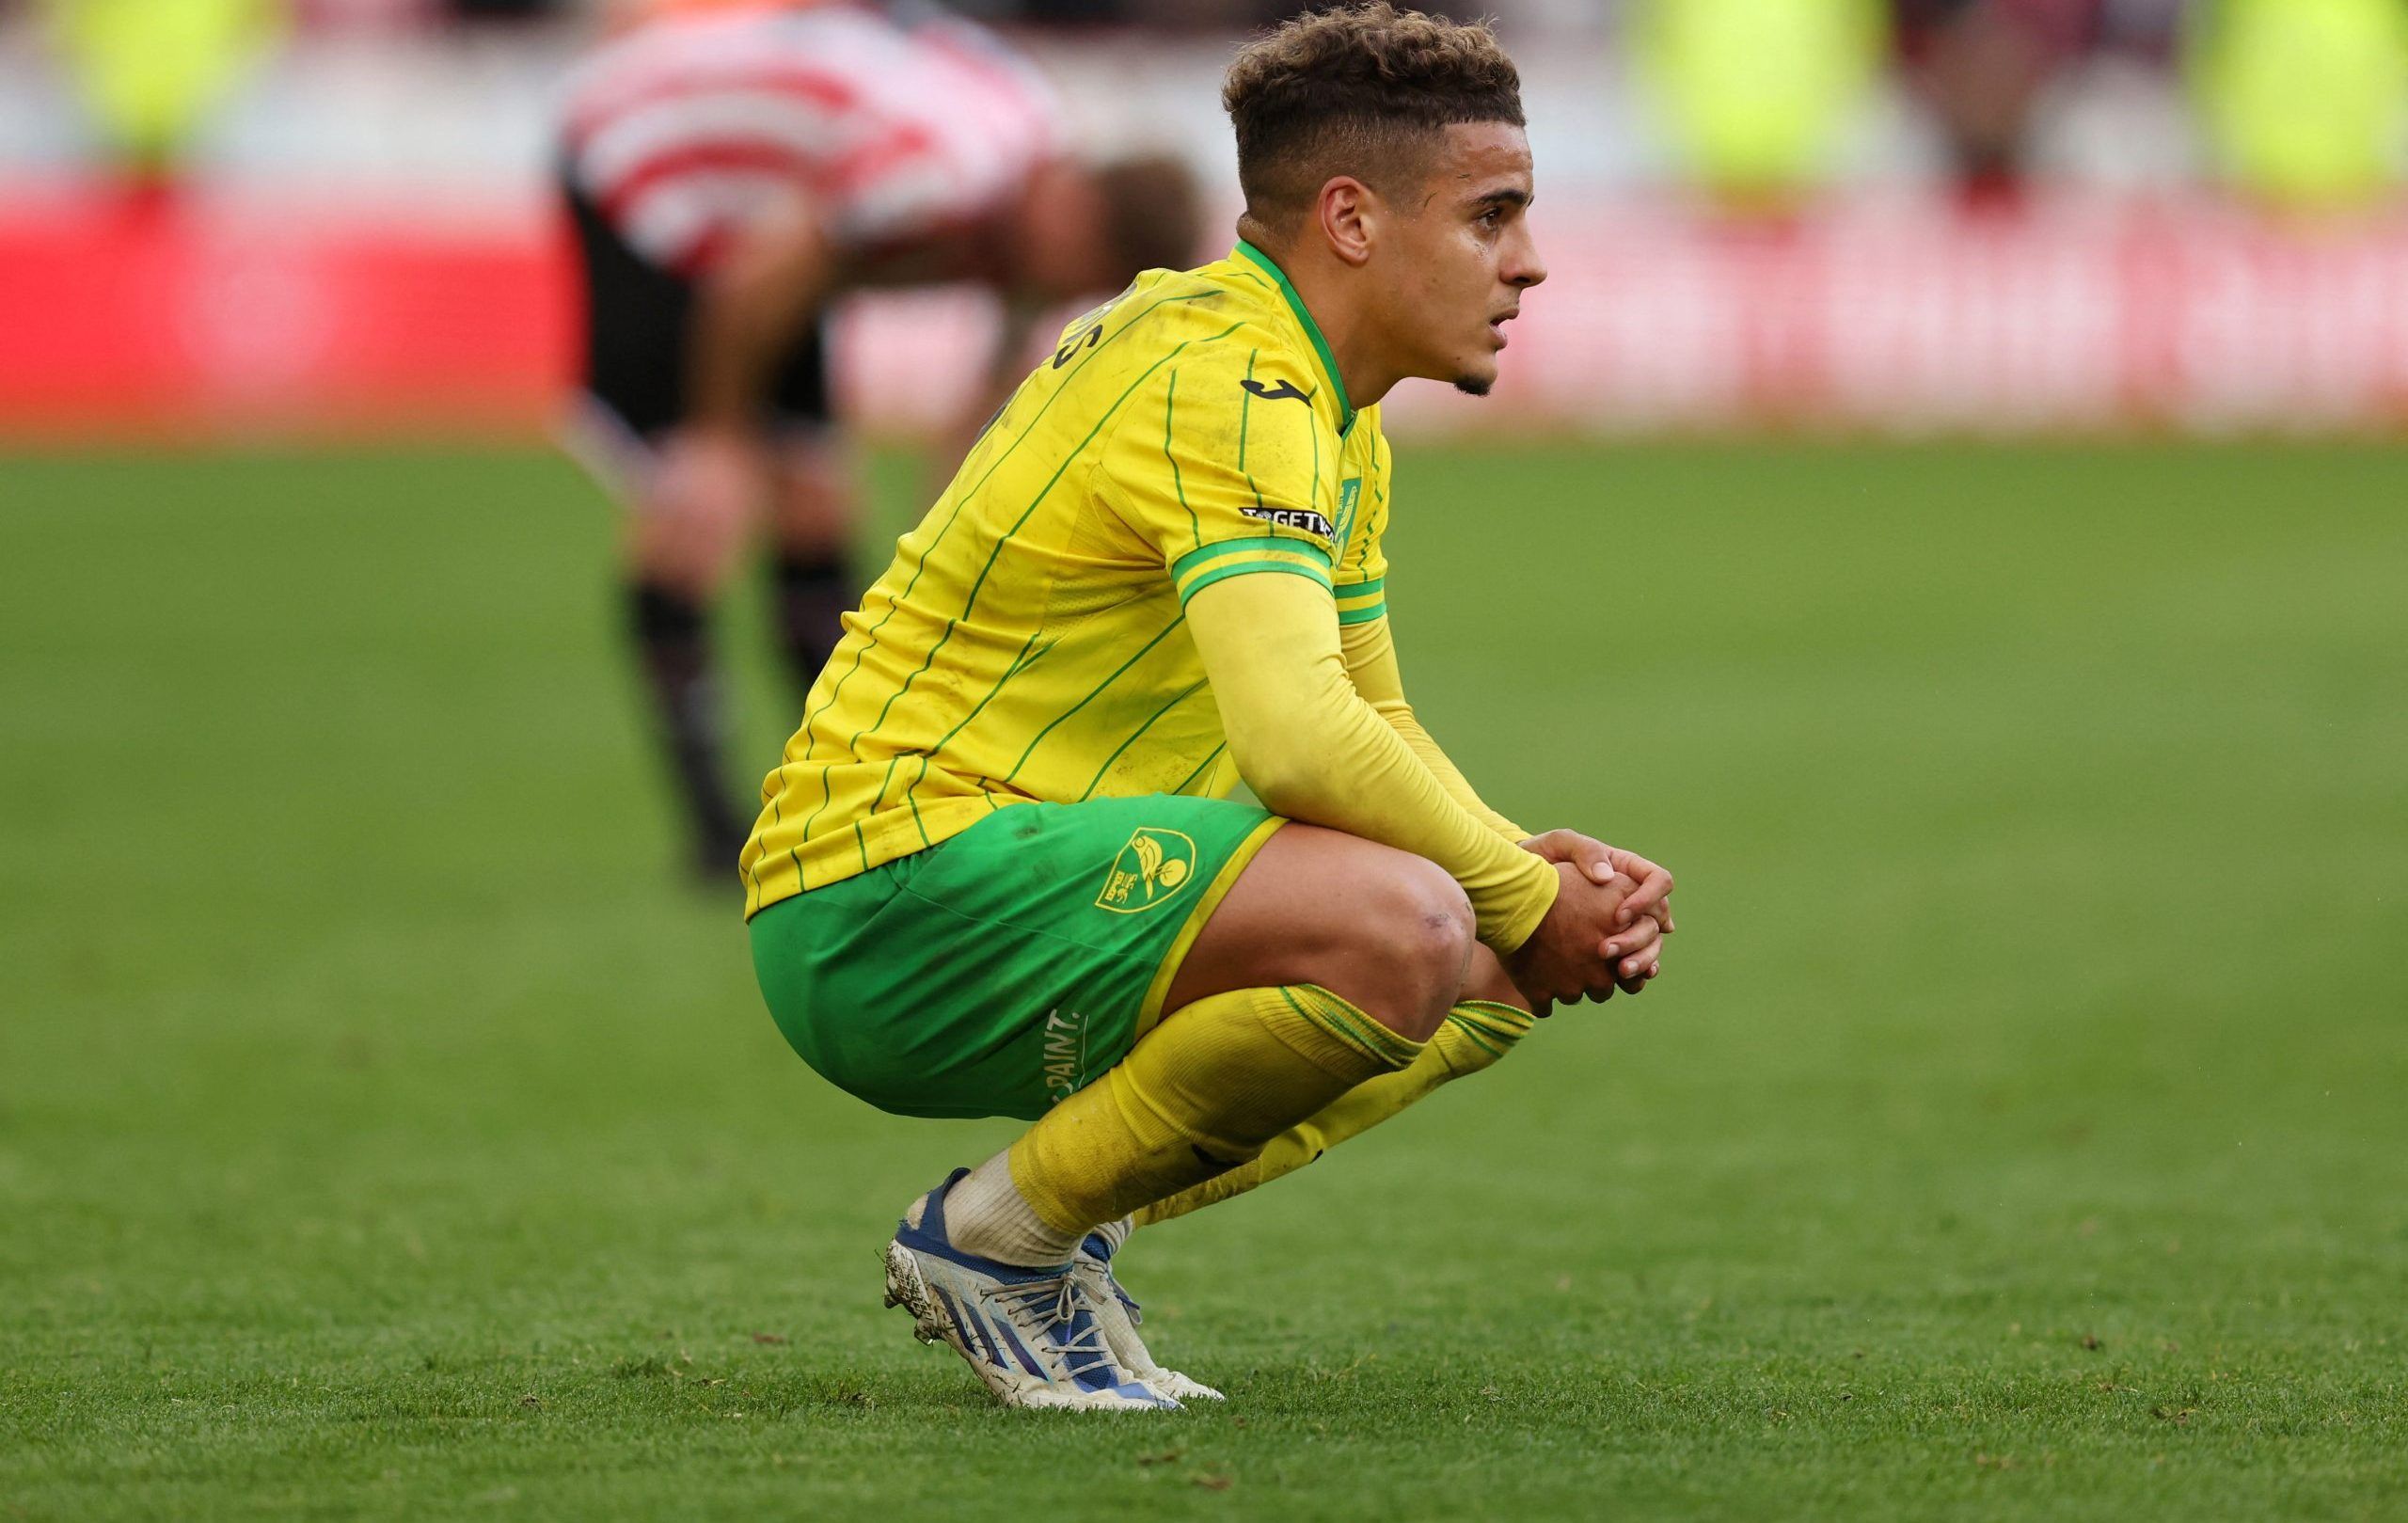 Norwich City's Max Aarons looks dejected after the match